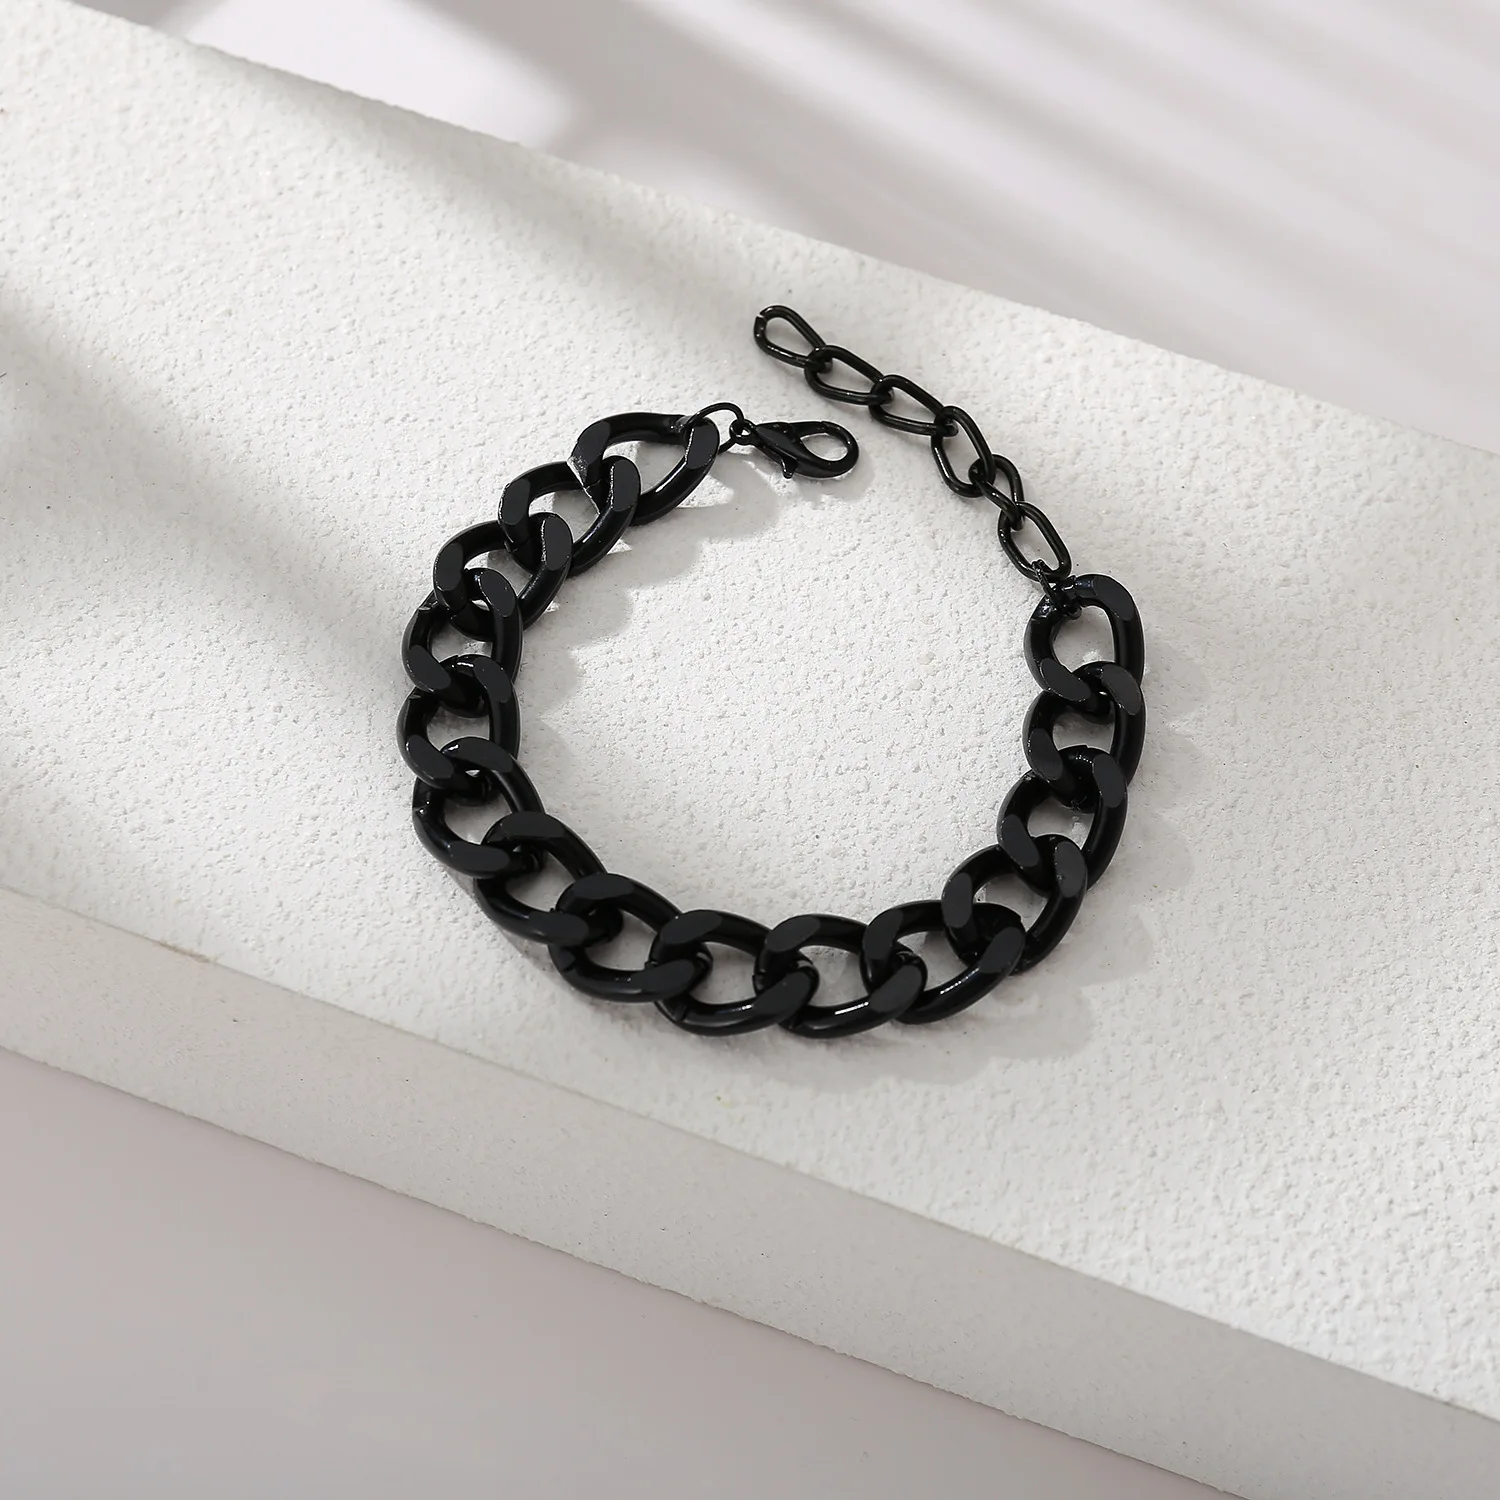 

OUYE New personality thick chain bracelet female creative black exaggerated chain metal bracelet, Picture shows